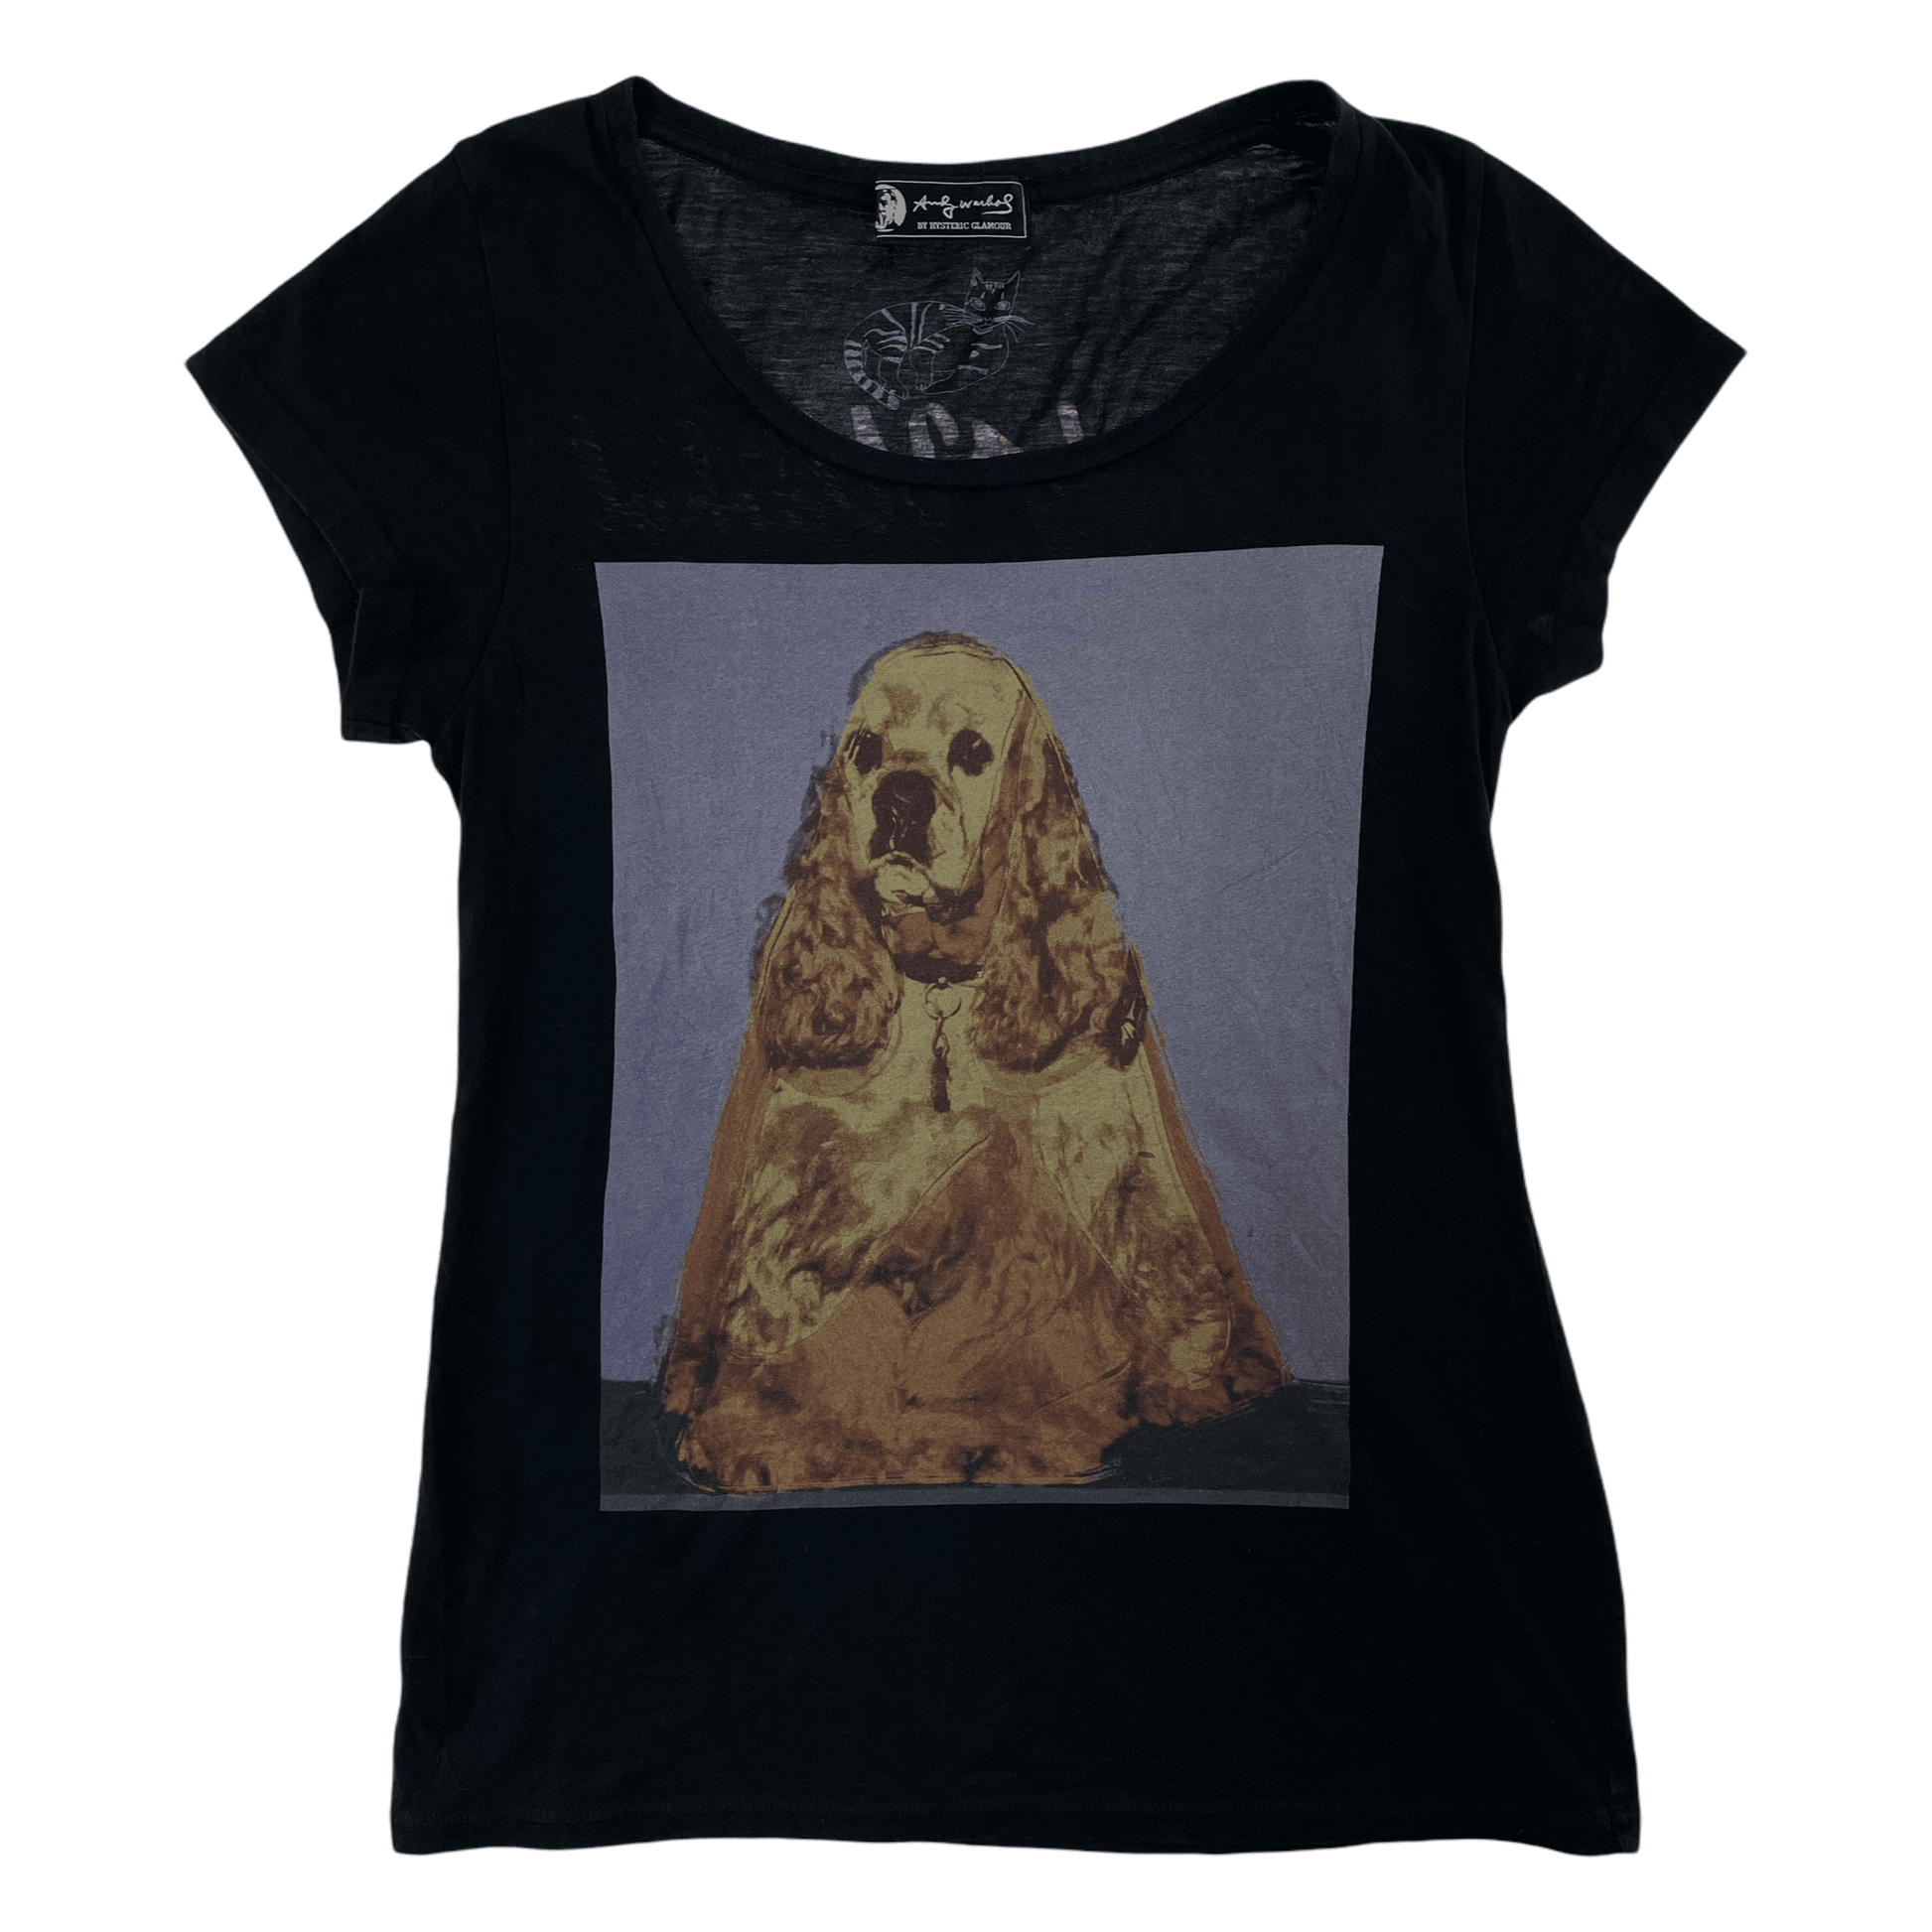 Hysteric Glamour Andy Warhol dog t shirt women’s size S - Known Source